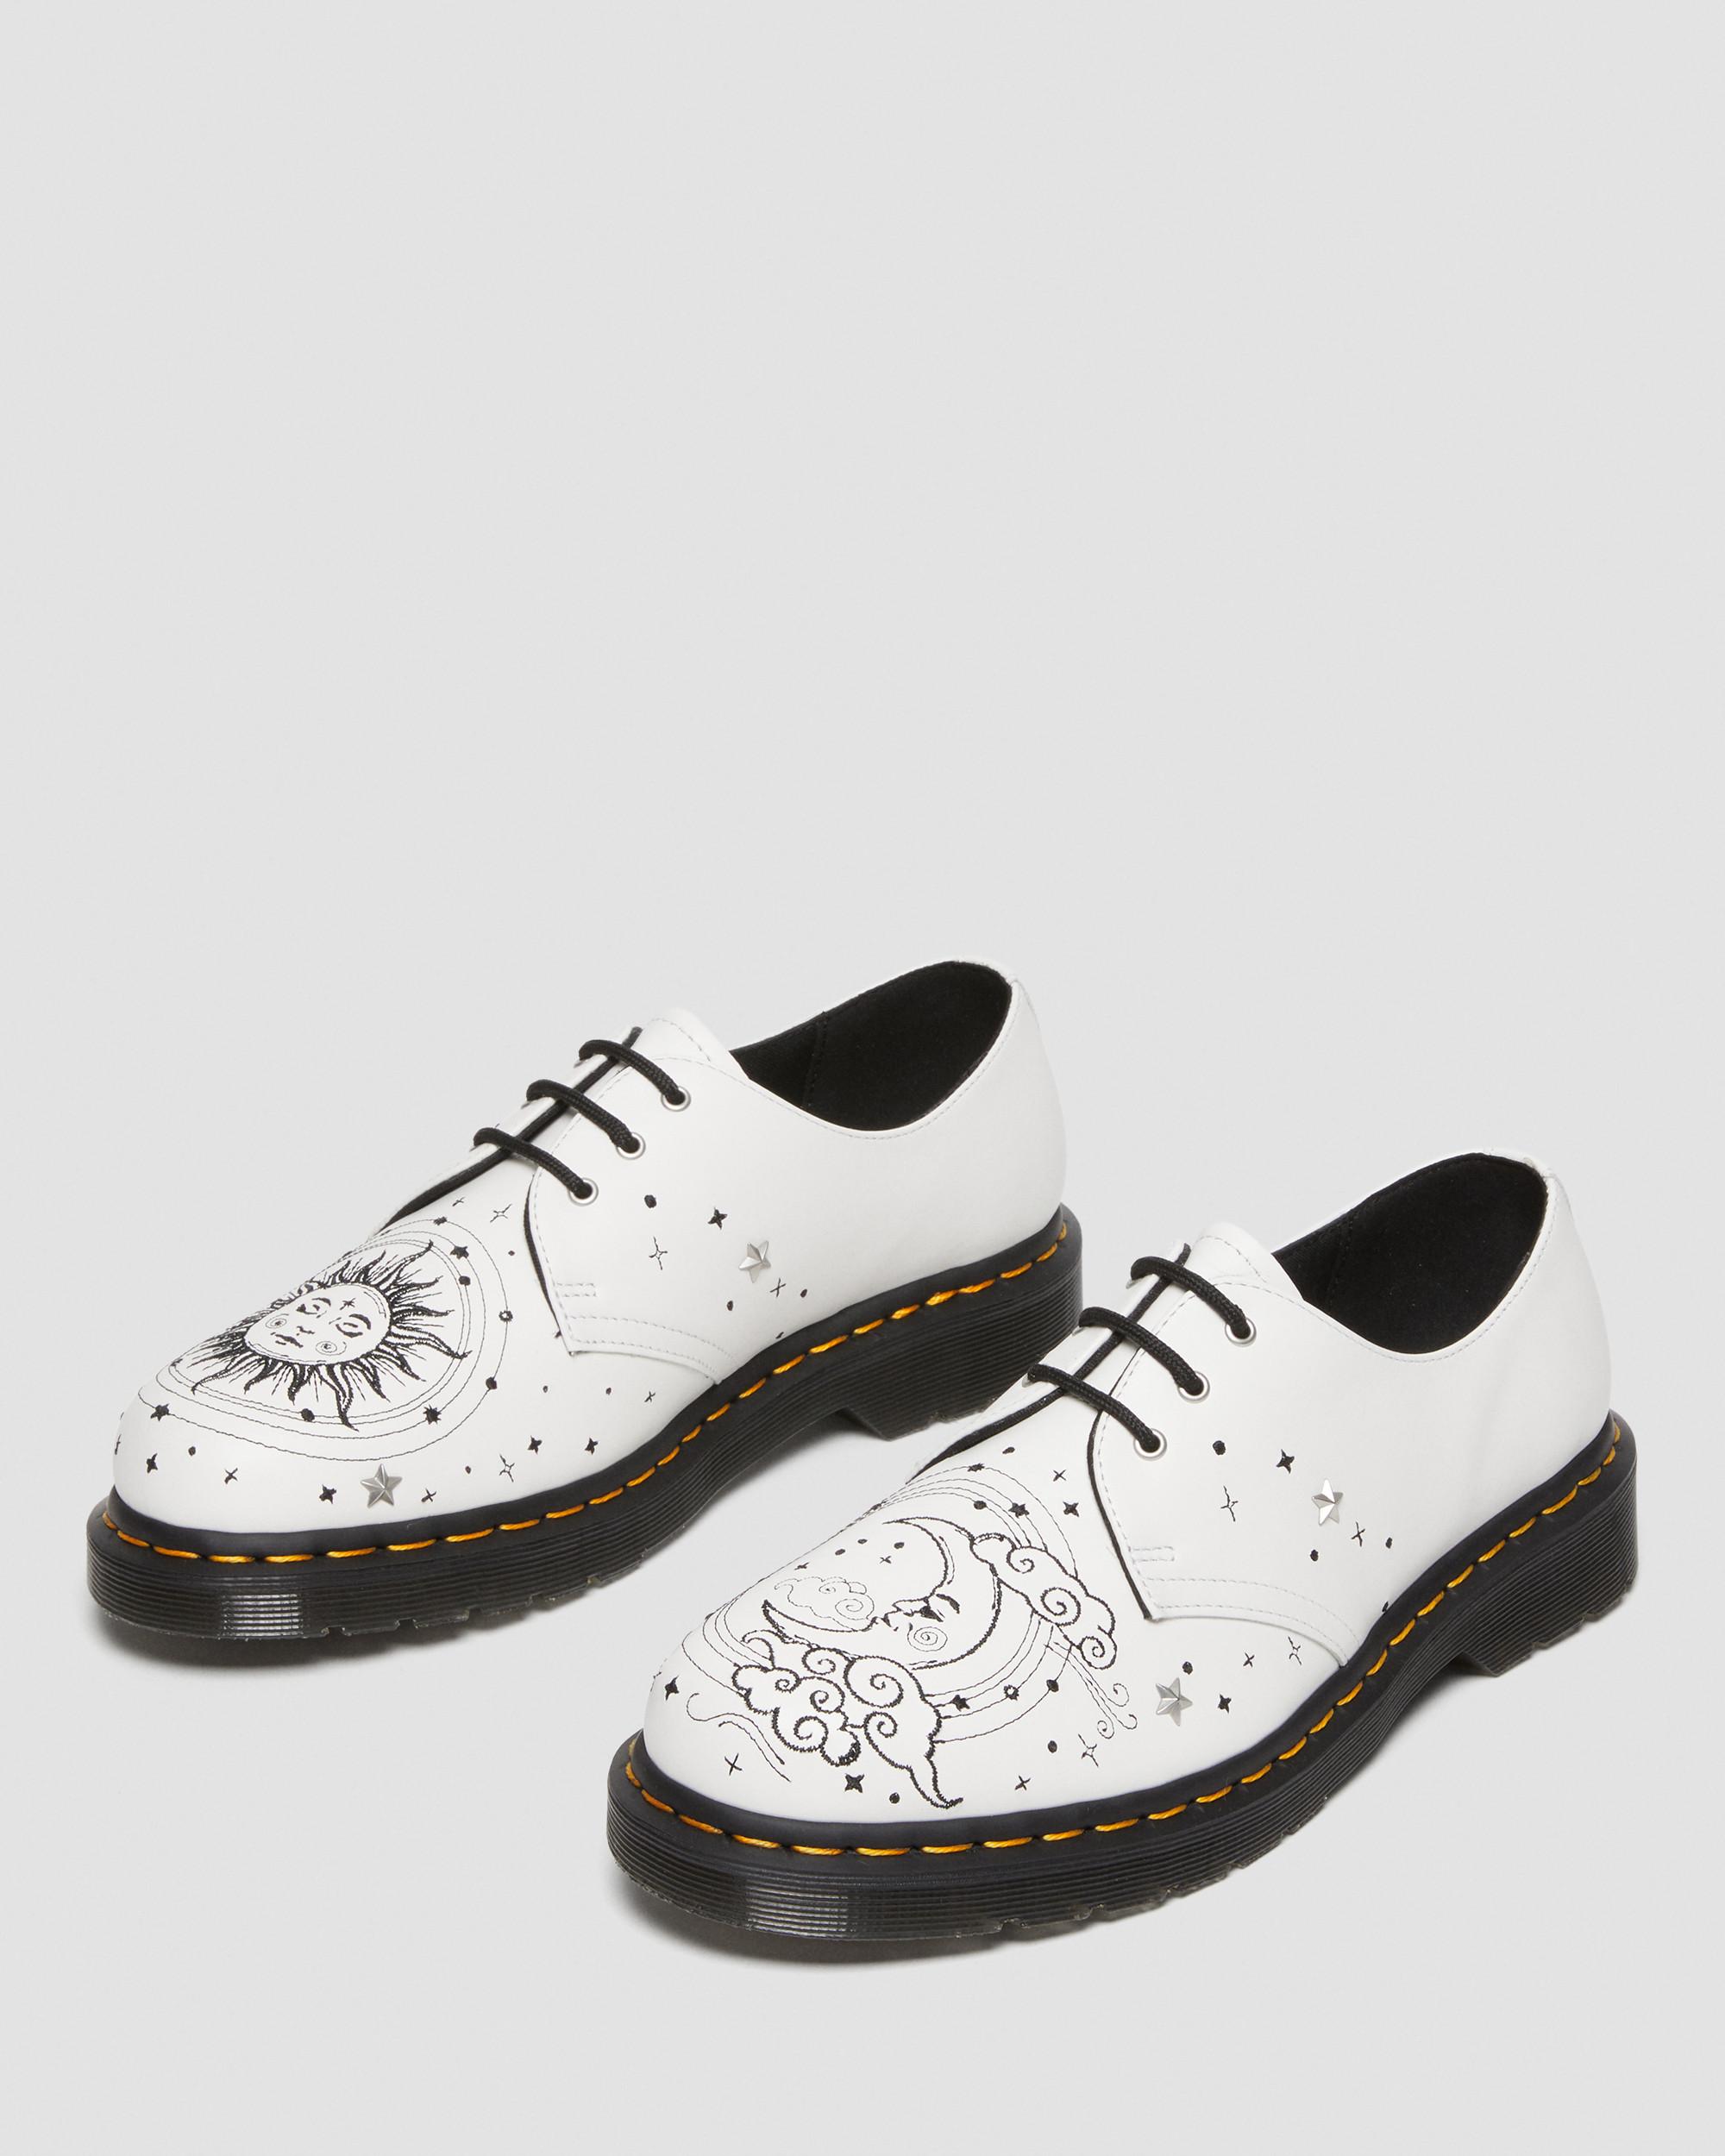 1461 Cosmic Embroidered Leather Shoes1461 Cosmic Embroidered Leather Shoes Dr. Martens